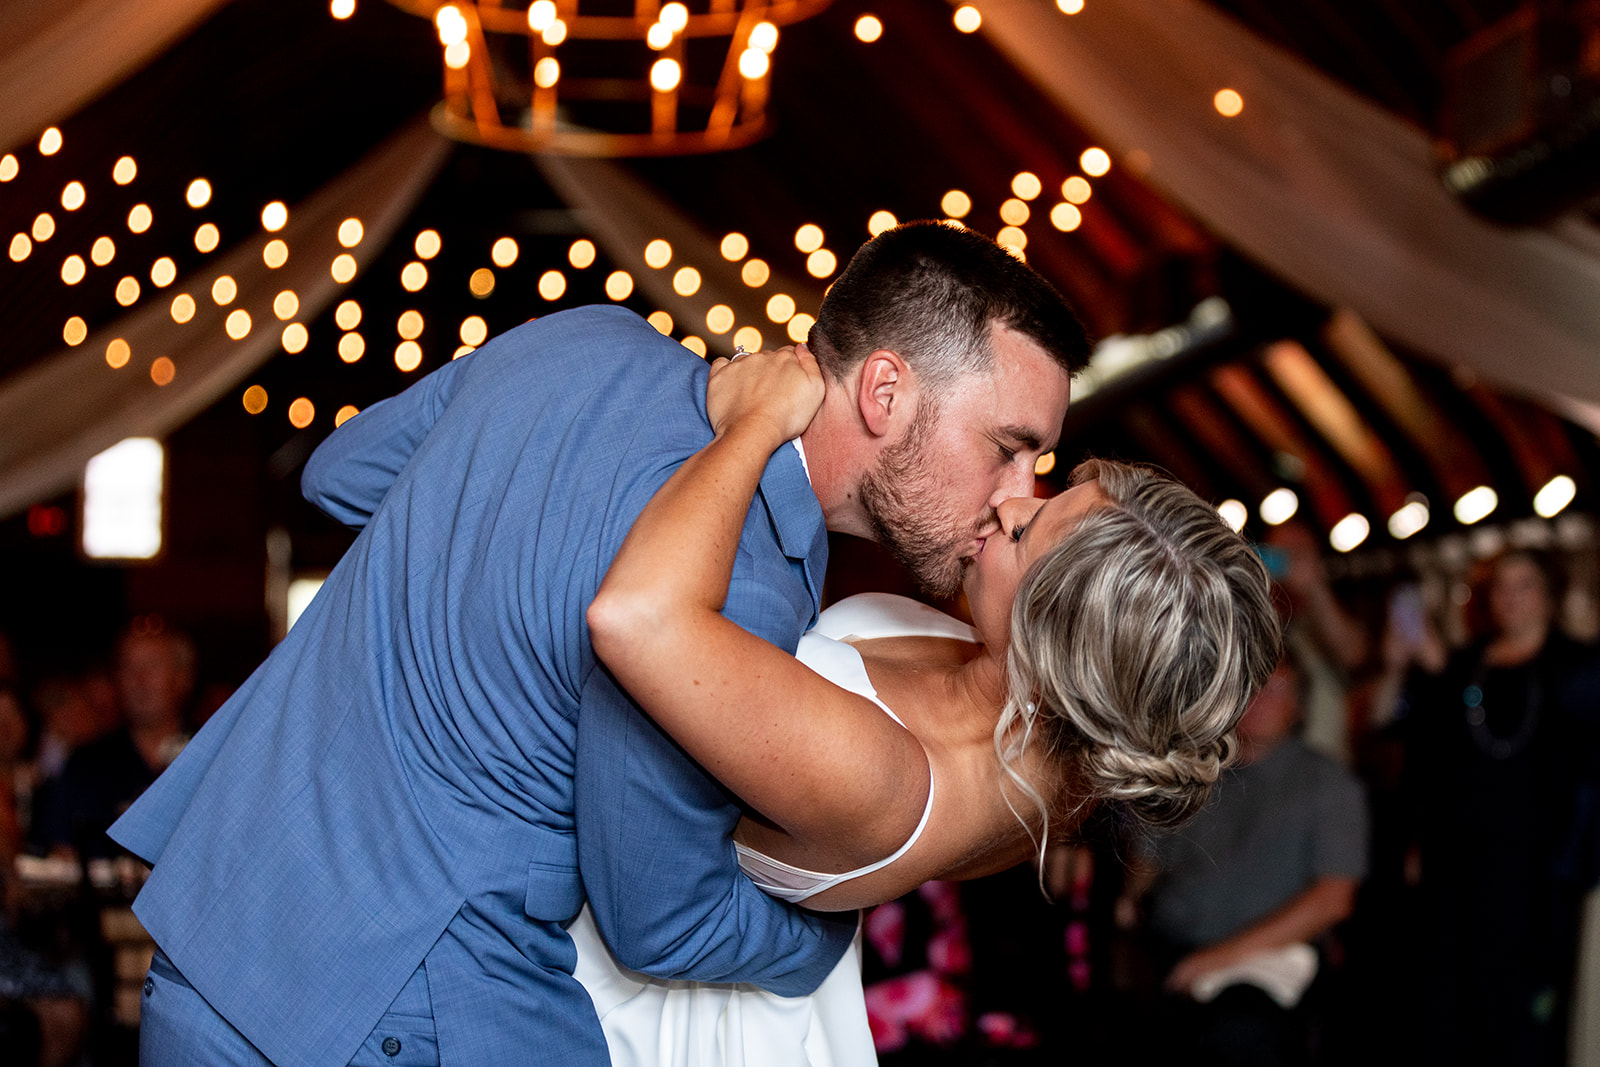 bride and groom first dance dip kiss photo at perona farms wedding venue in new jersey